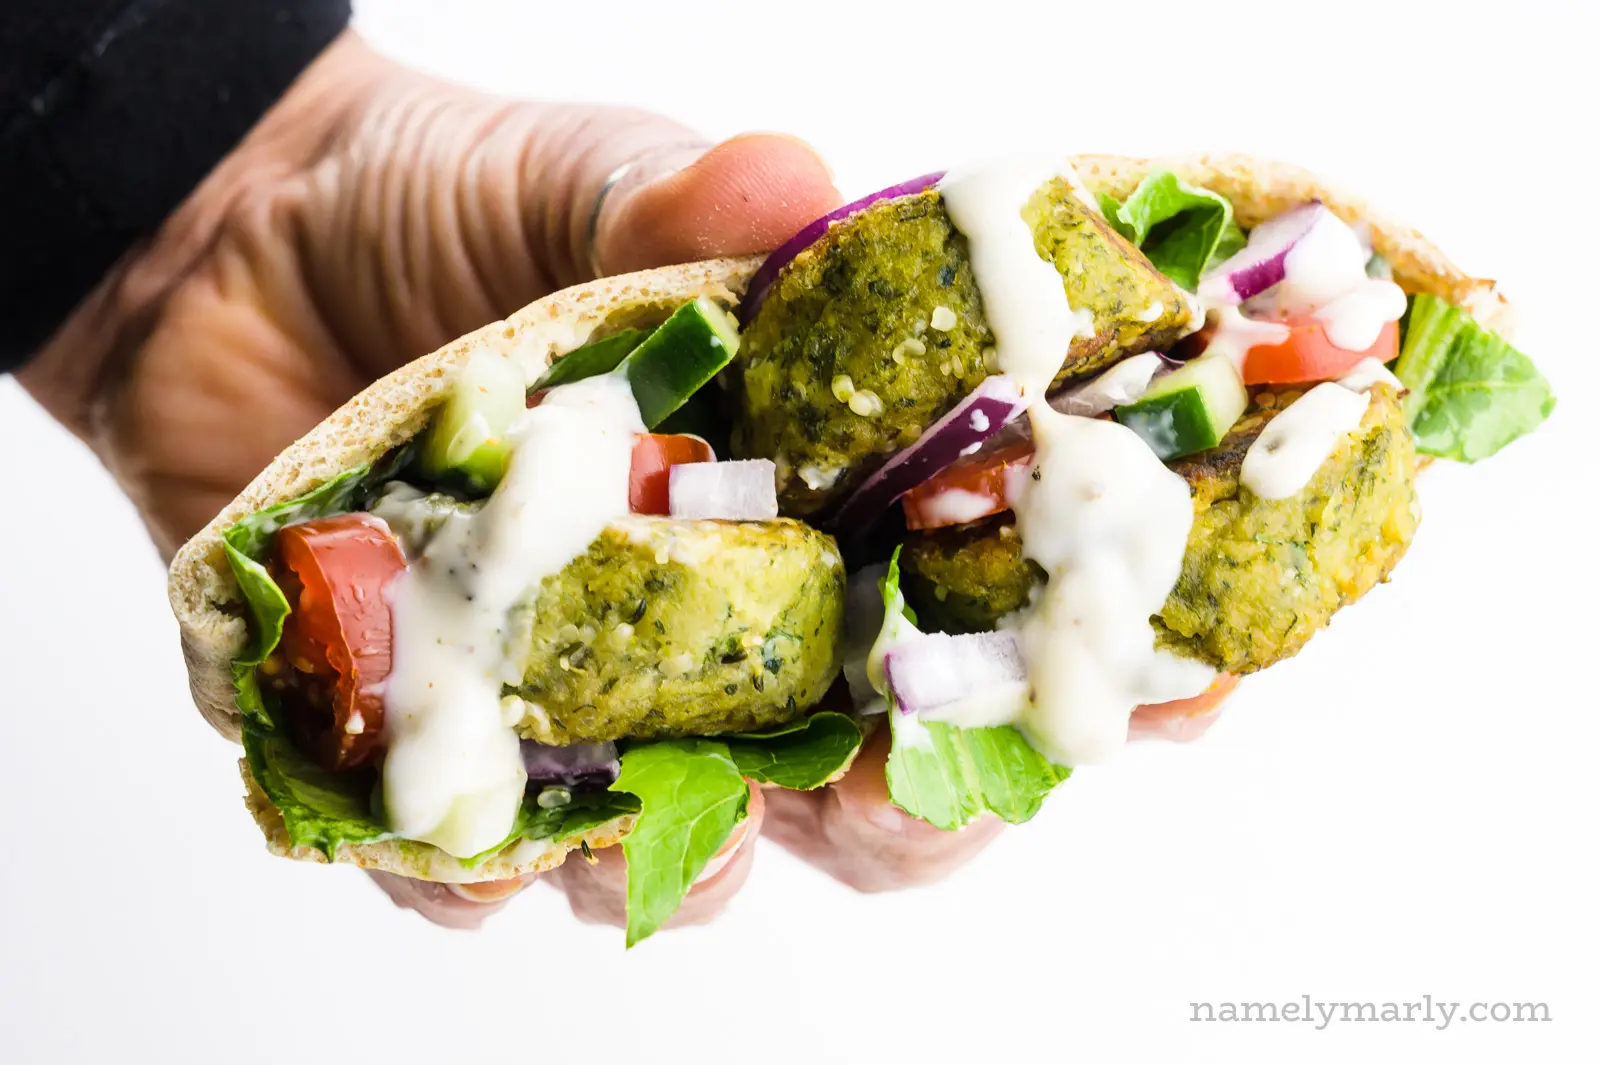 A hand holds a baked falafel sandwich with greens and sauce.